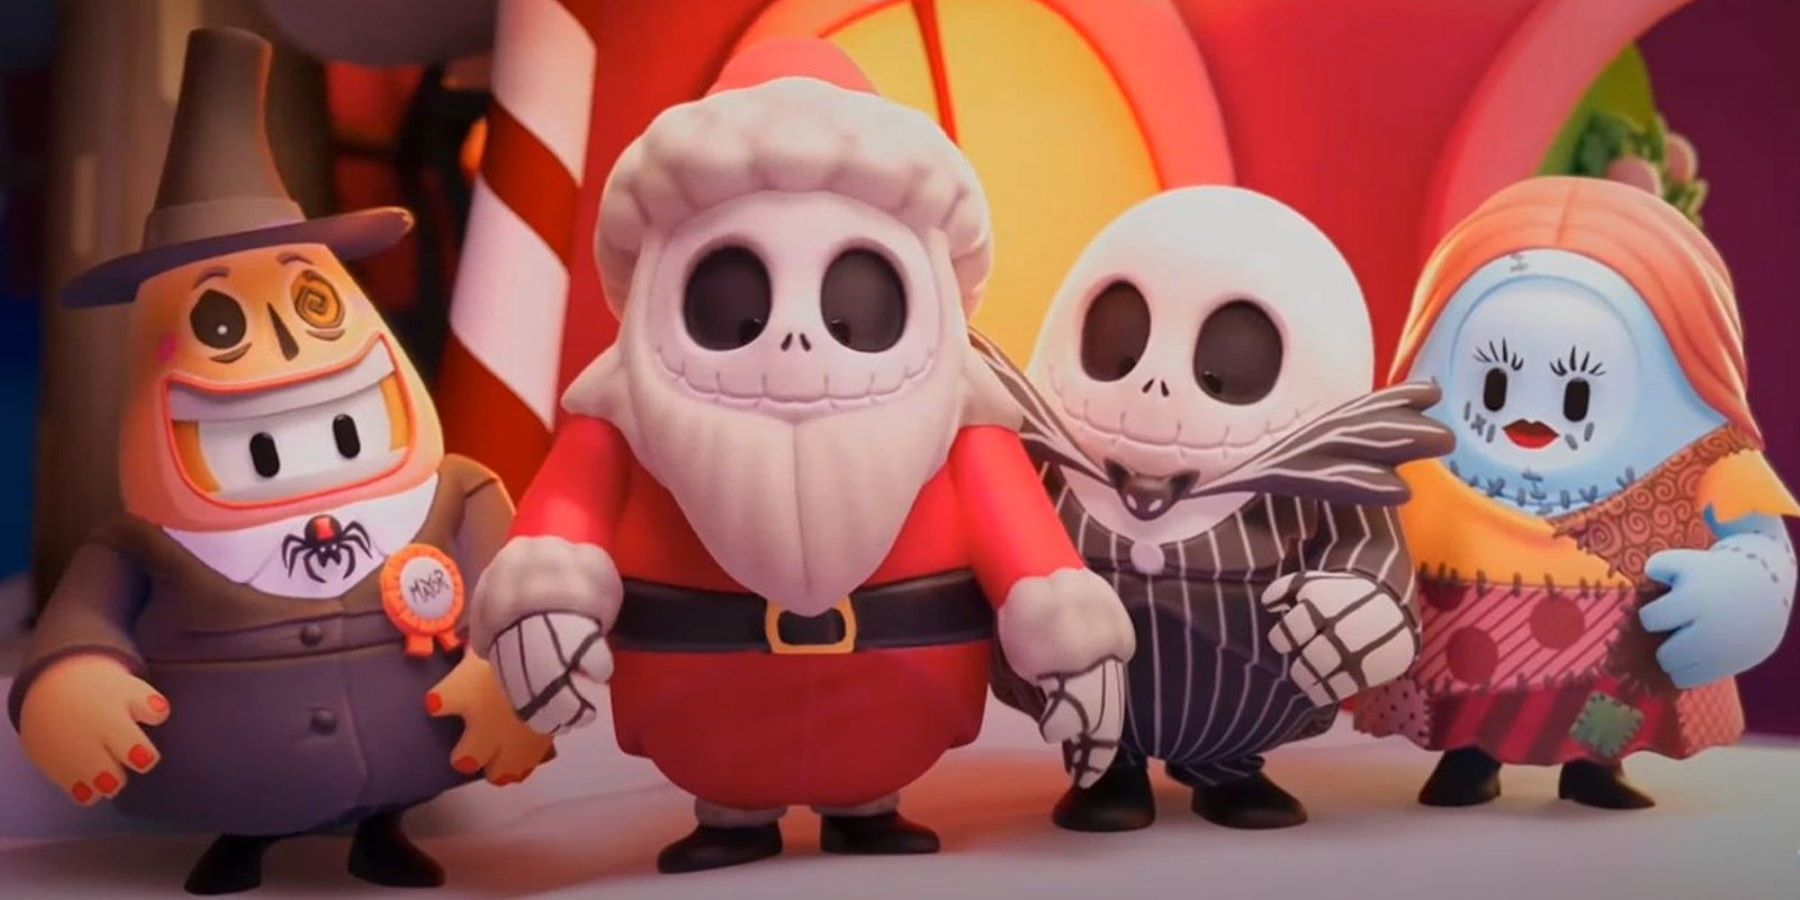 Fall Guys: Ultimate Knockout characters in costumes based on Jack Skellington, Sally, and the Mayor of Halloween Town from The Nightmare Before Christmas